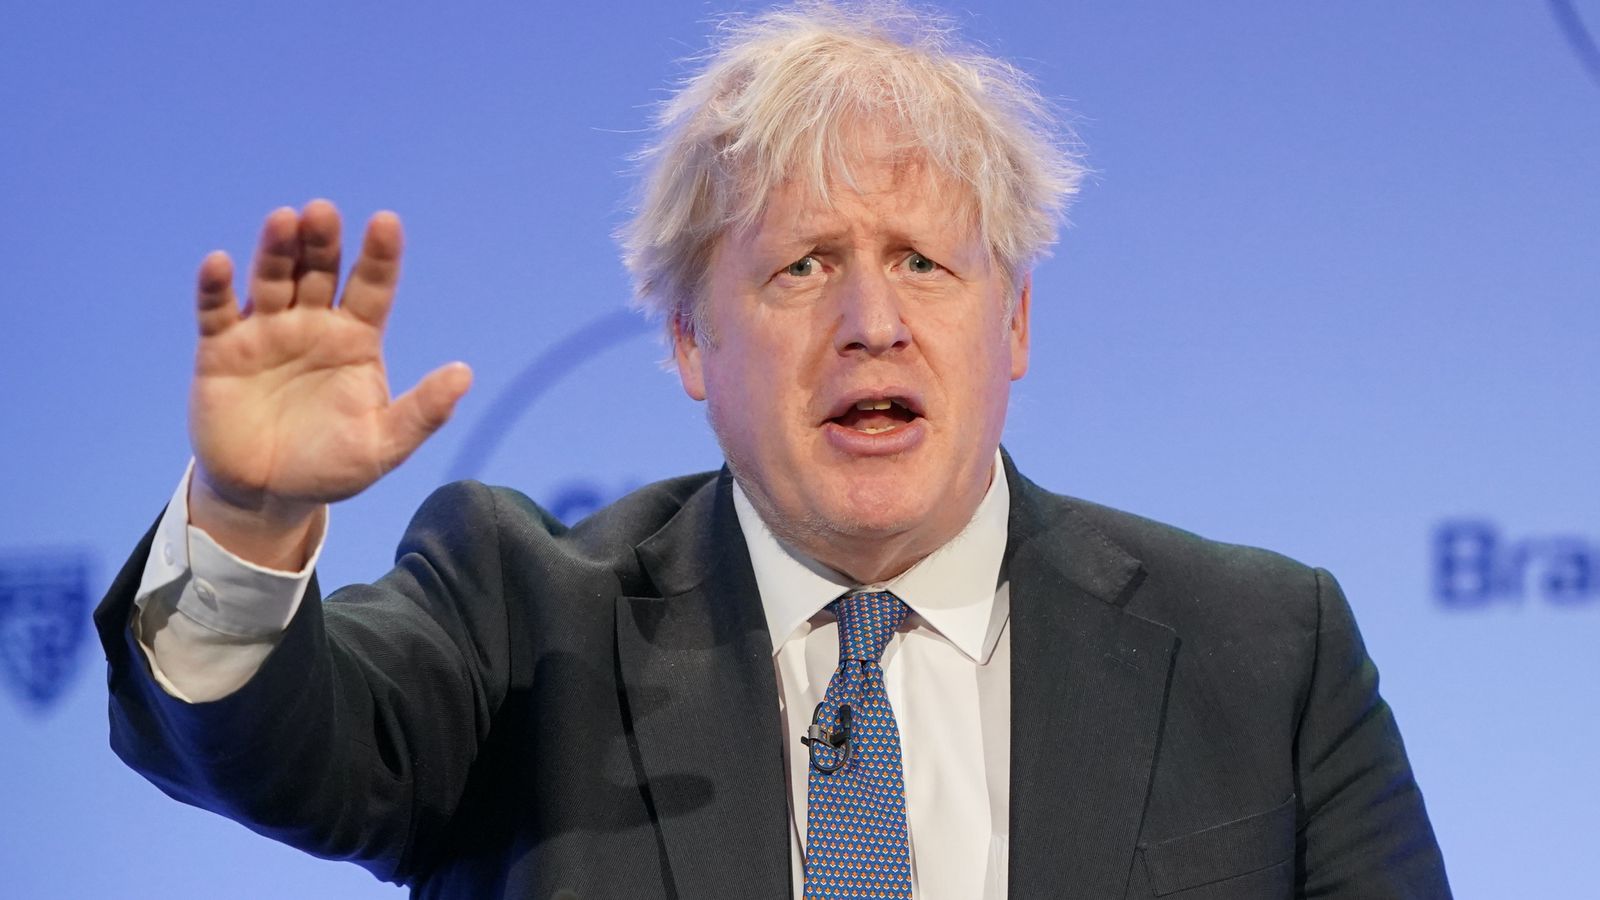 Boris Johnson warned he could lose public legal funding for COVID inquiry